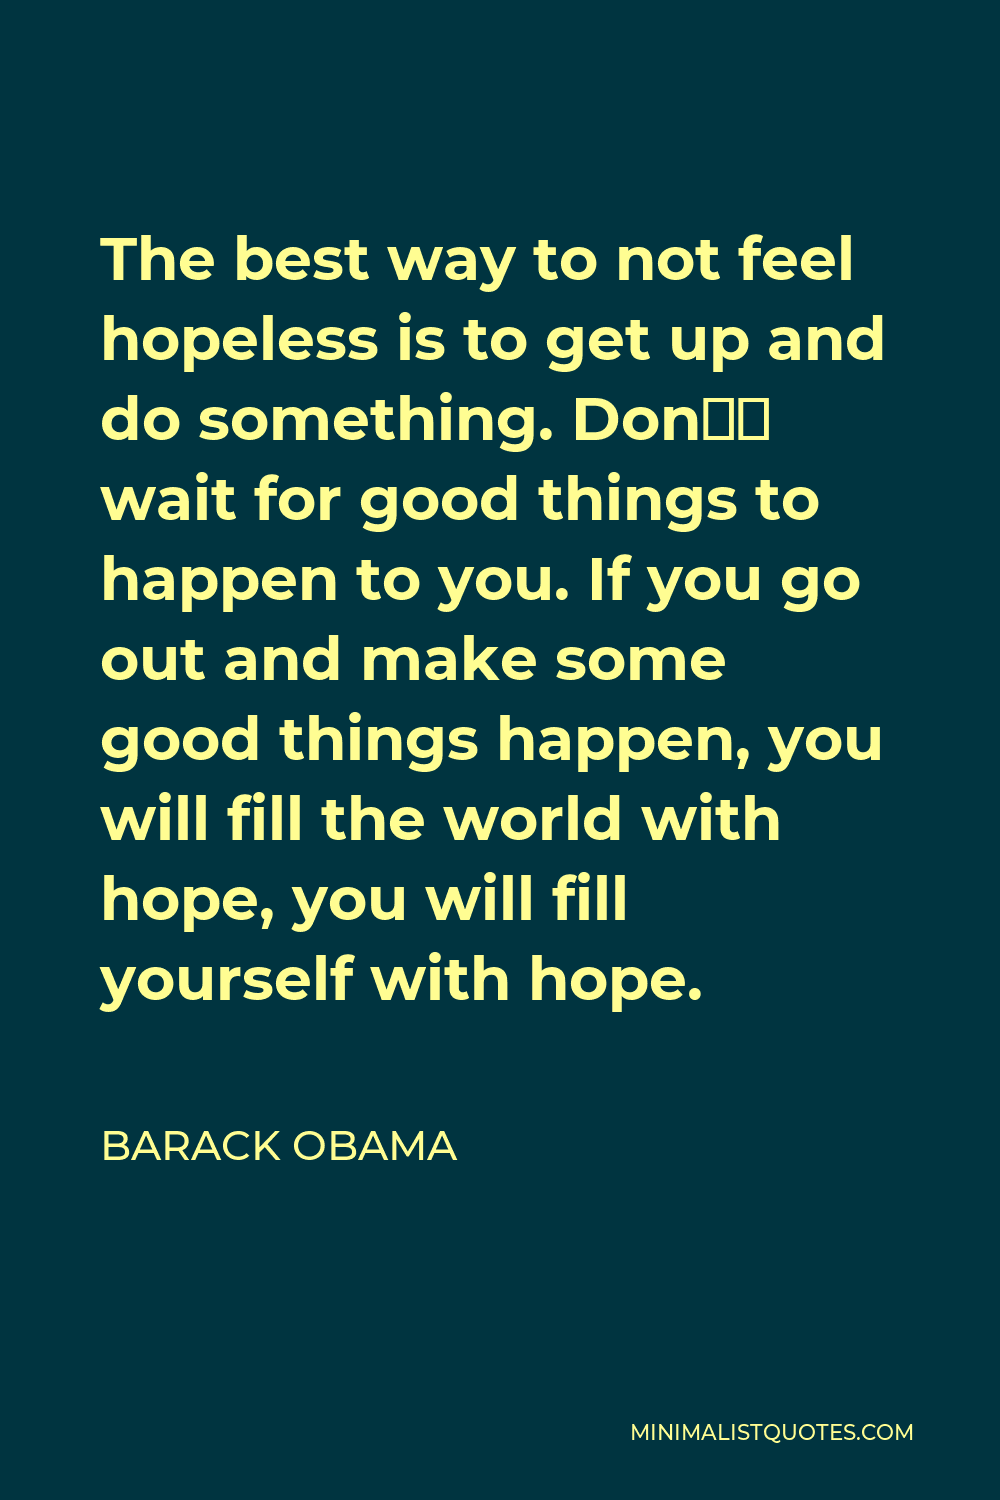 Barack Obama Quote - The best way to not feel hopeless is to get up and do something. Don’t wait for good things to happen to you. If you go out and make some good things happen, you will fill the world with hope, you will fill yourself with hope.